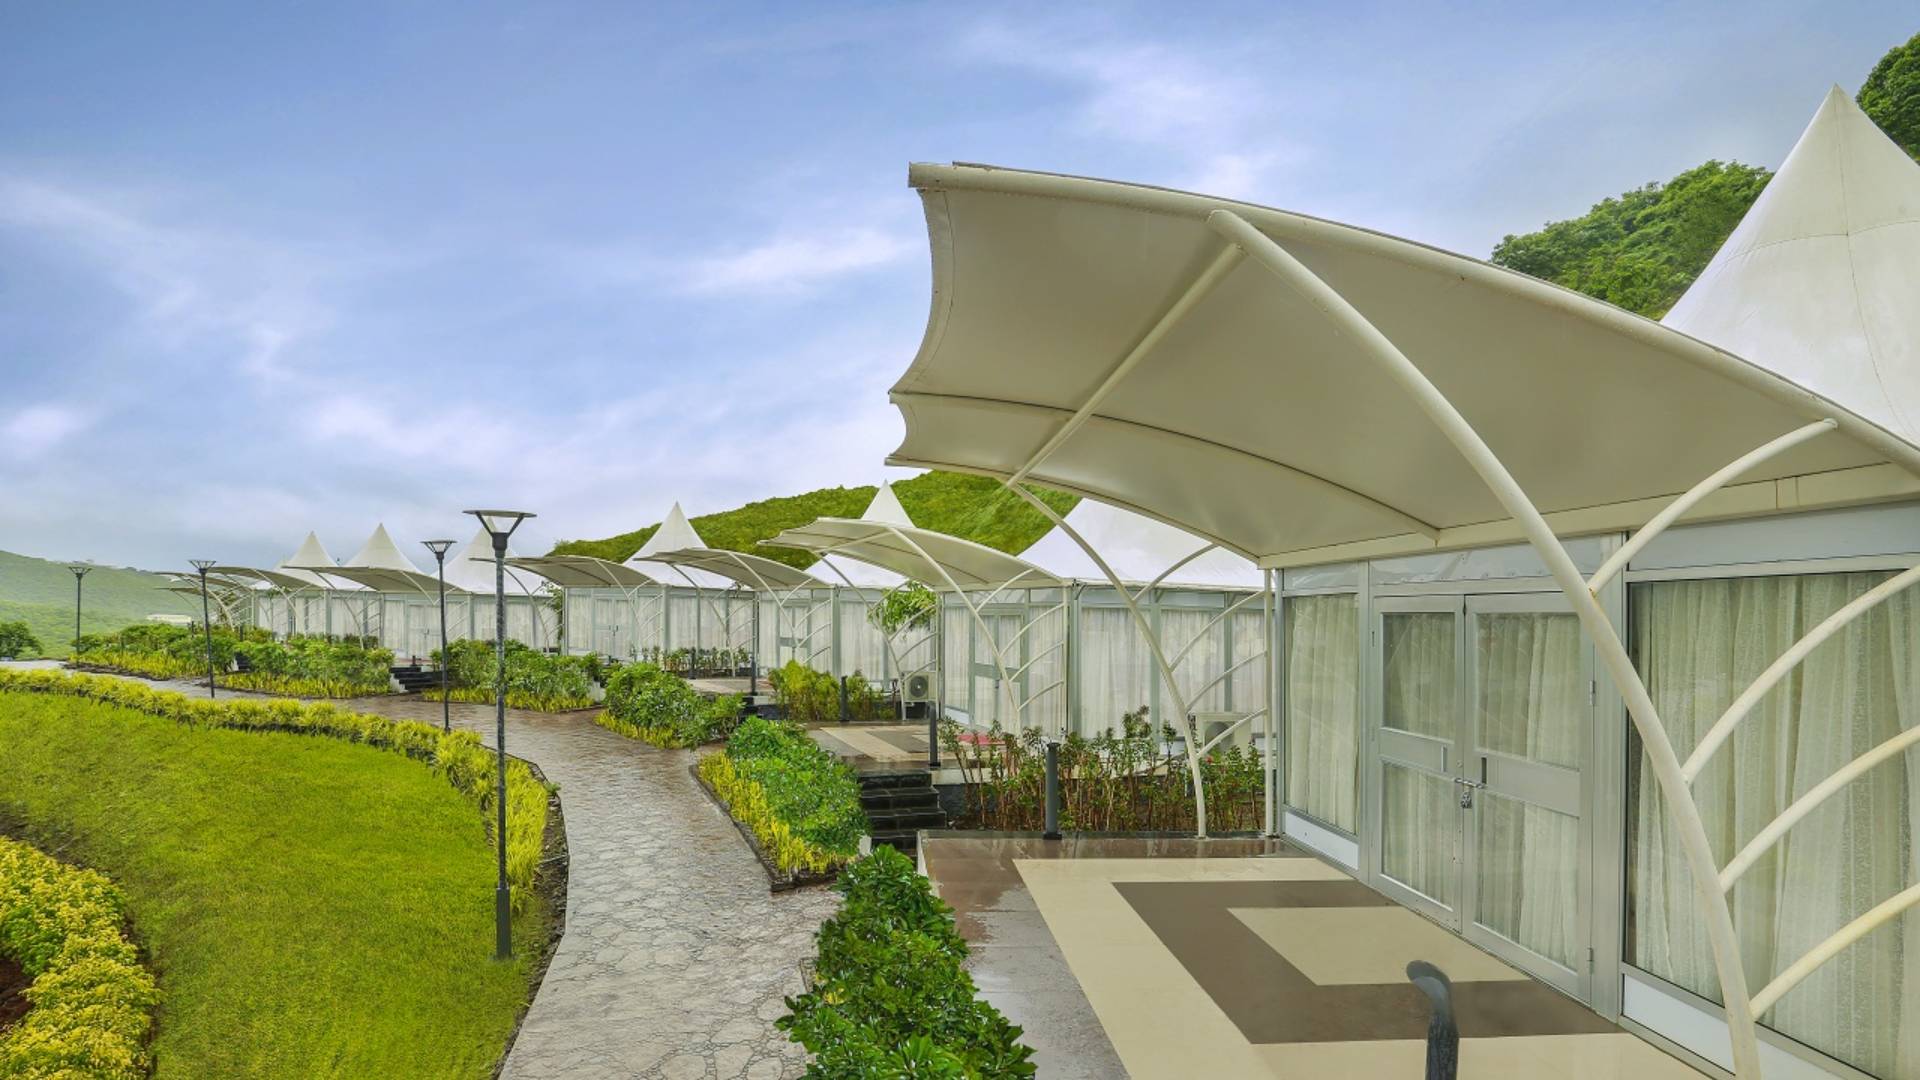 THE TOPAZ AC LUXURIOUS GLASS TENTS at Sunny's World Pune (2)